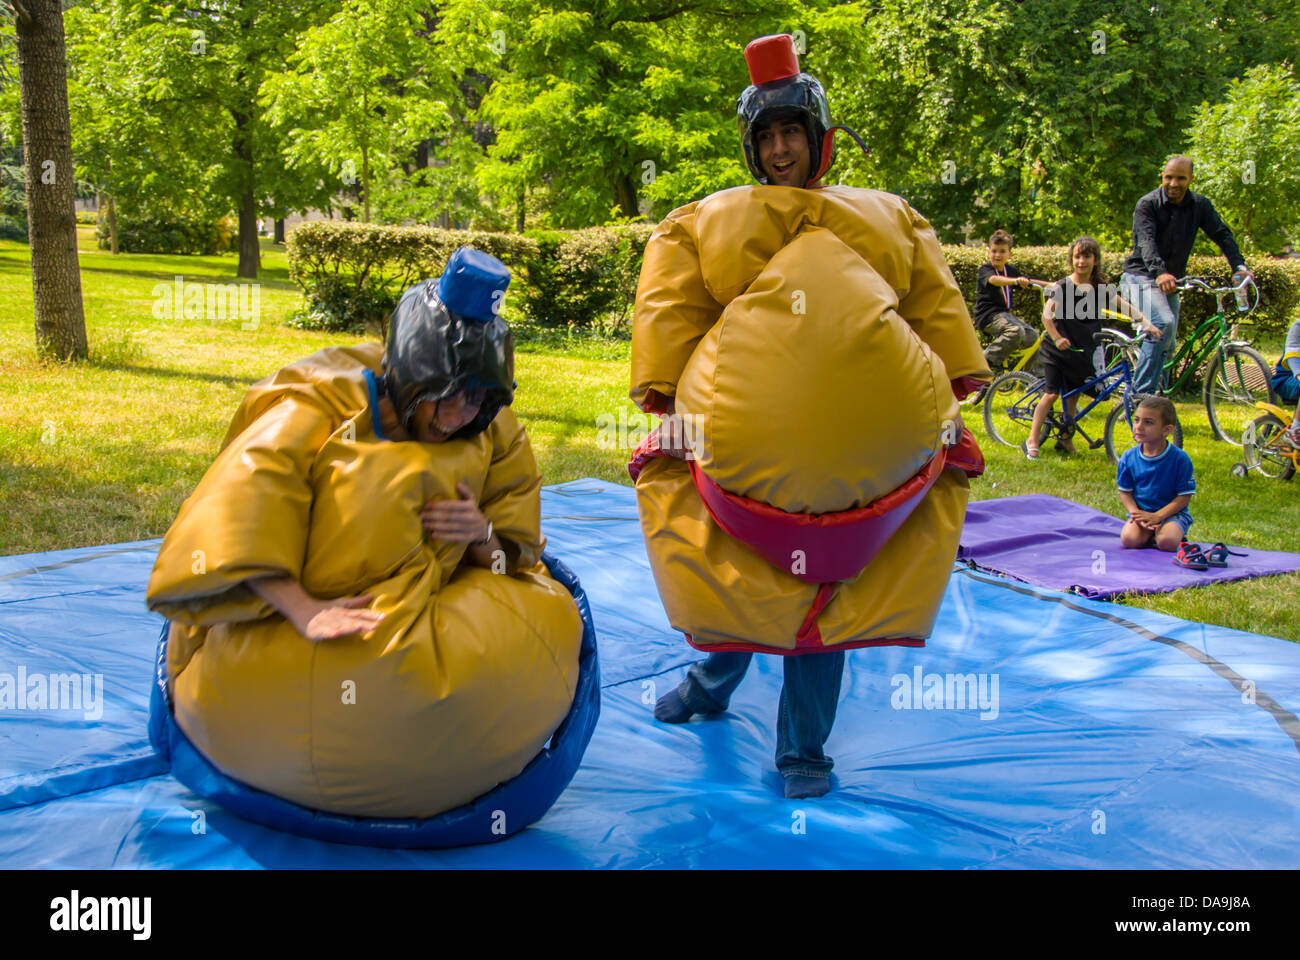 Paris, France, Young People, Two Sumo Wrestlers Play Fighting in Costume Outside in 'Bois de Vincennes' Fat Suits Stock Photo